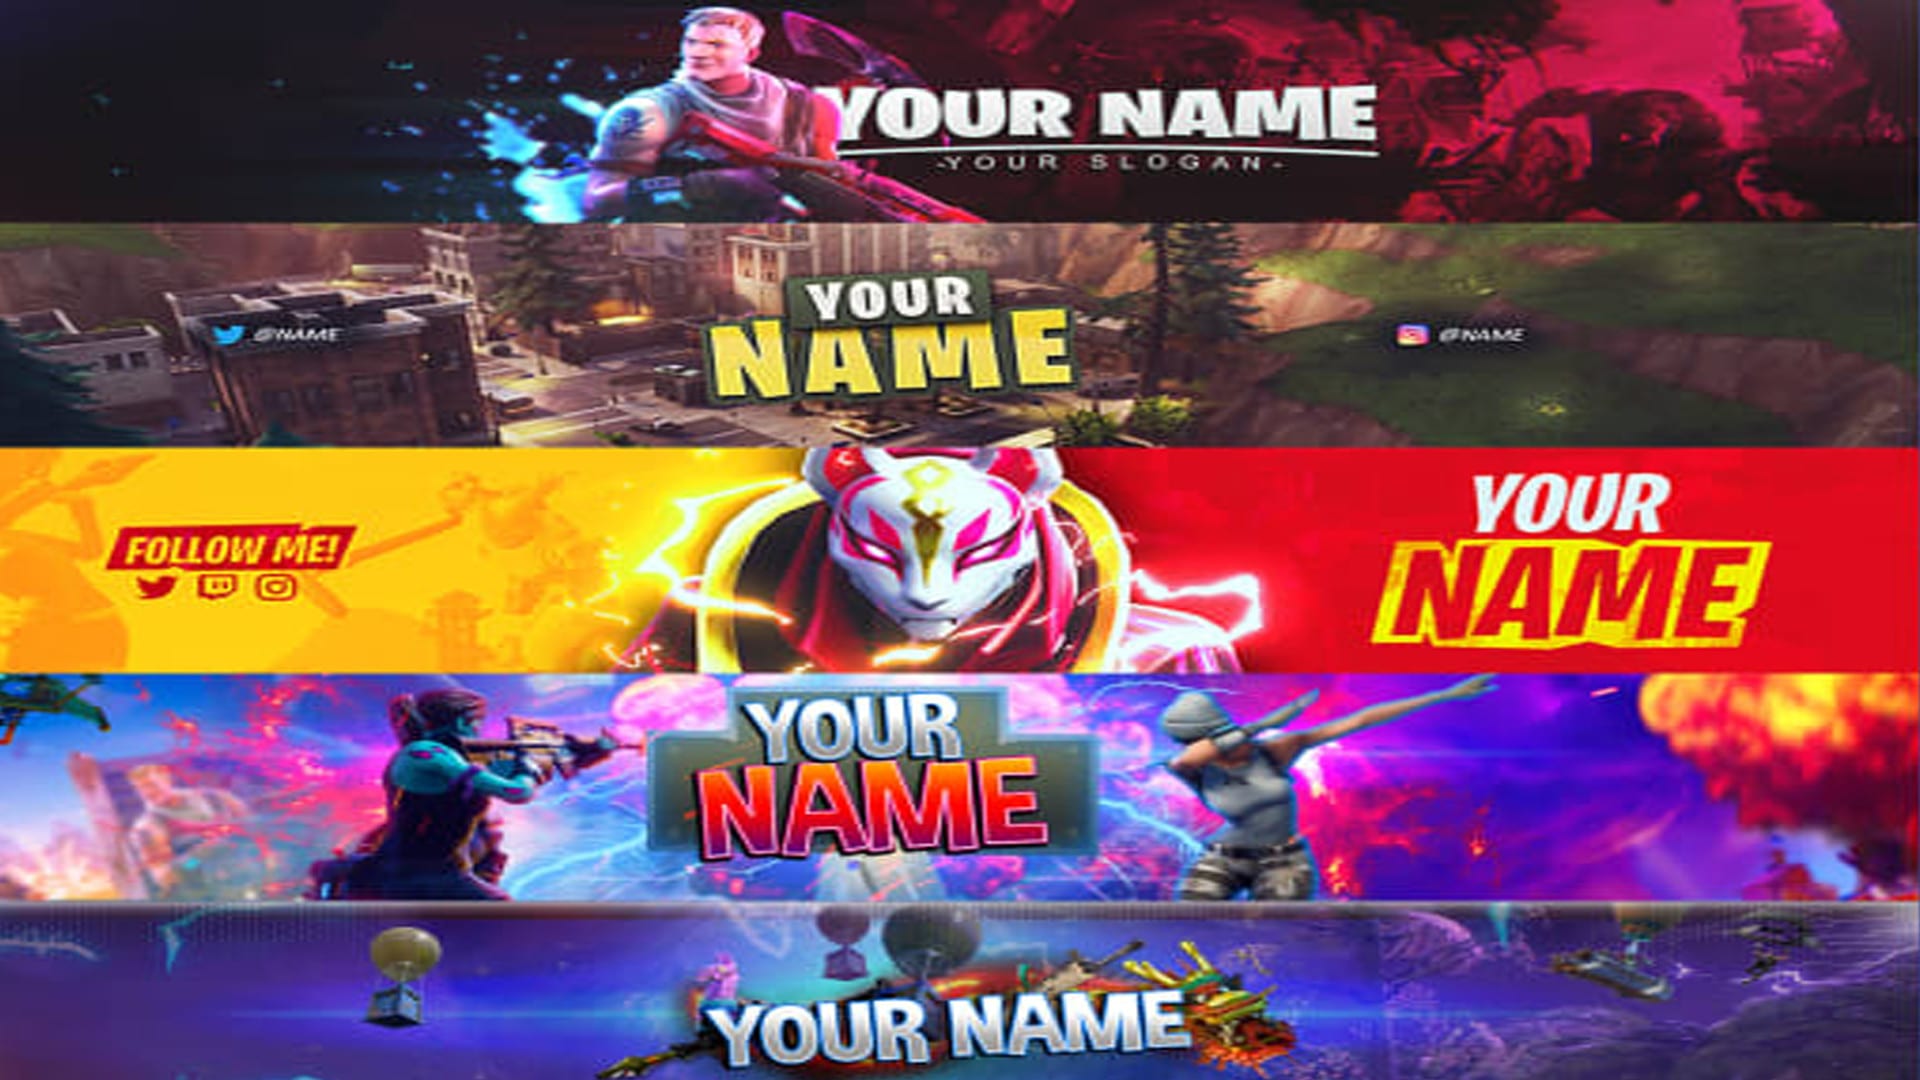 Make You An Epic Gamer Banner For Youtube And Twitch By Ptwry04